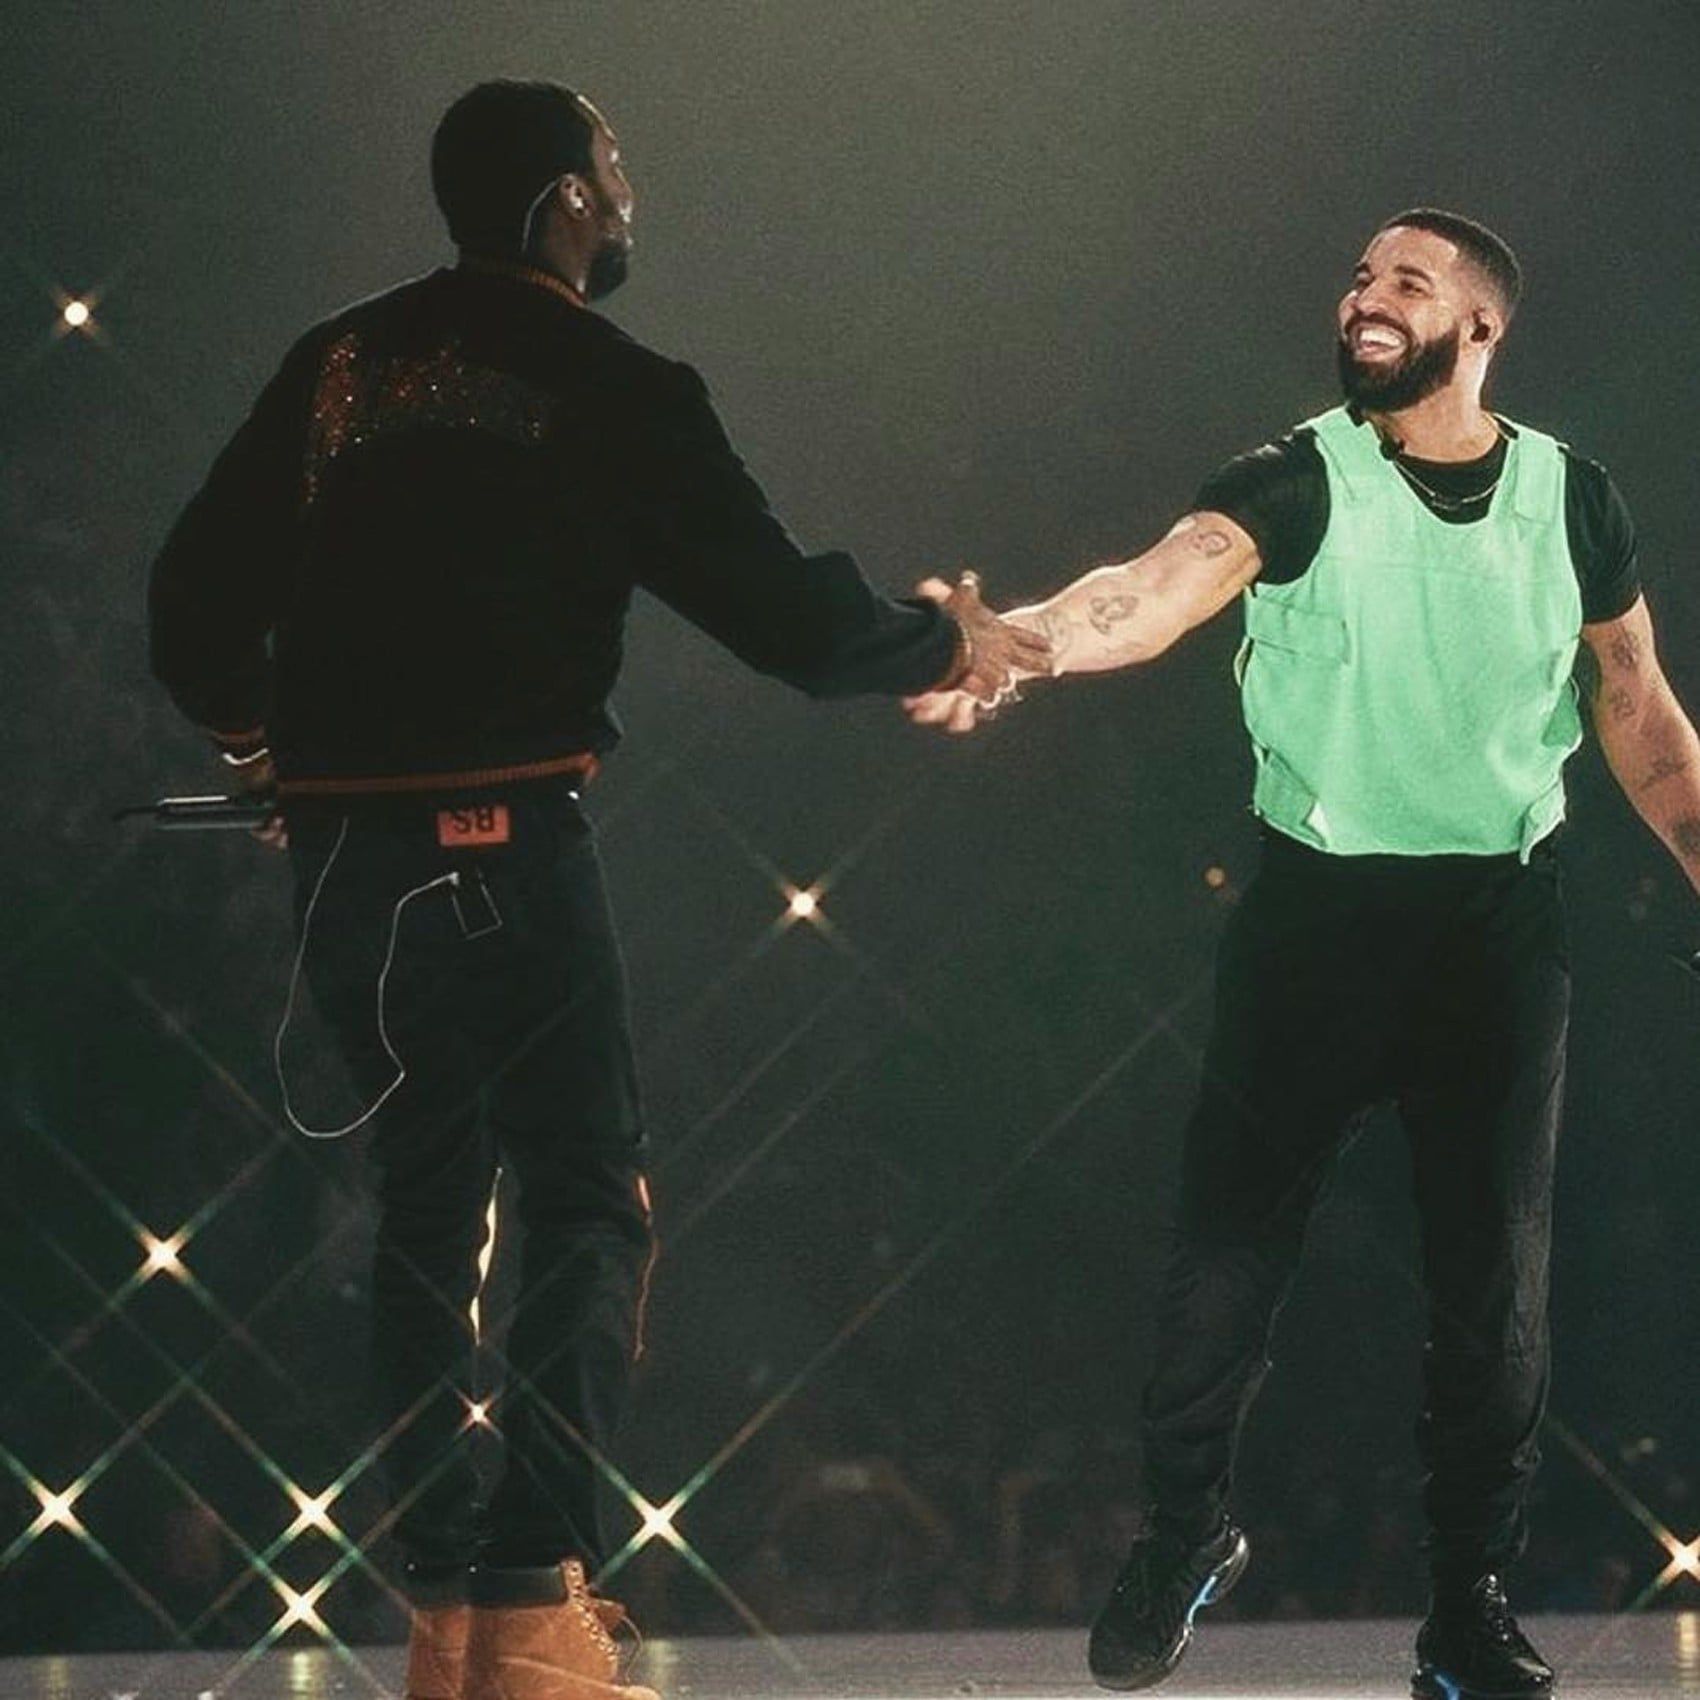 Meek mill and Drake reunited after for years if drama and beef